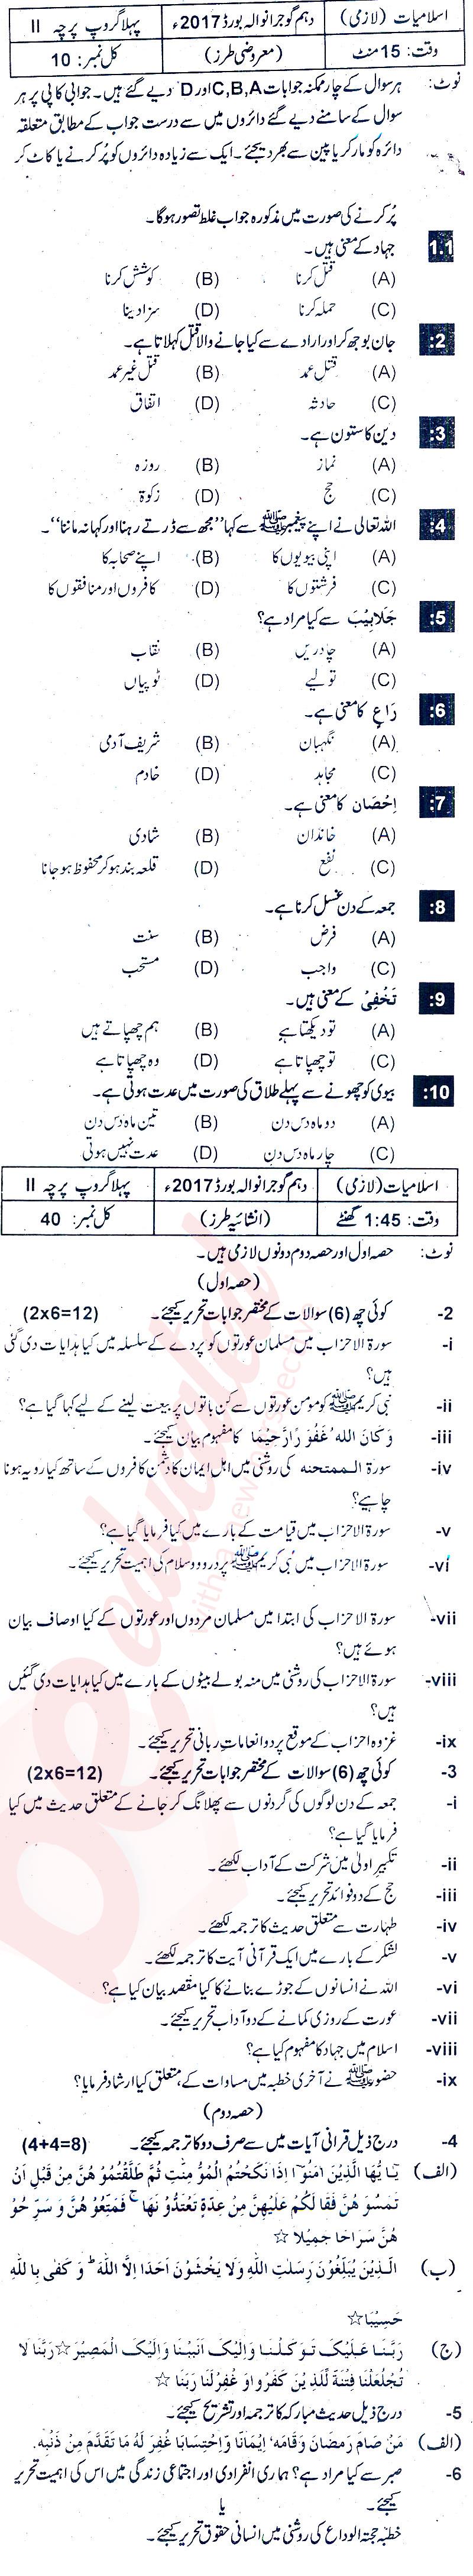 Islamiat (Compulsory) 10th class Past Paper Group 1 BISE Gujranwala 2017